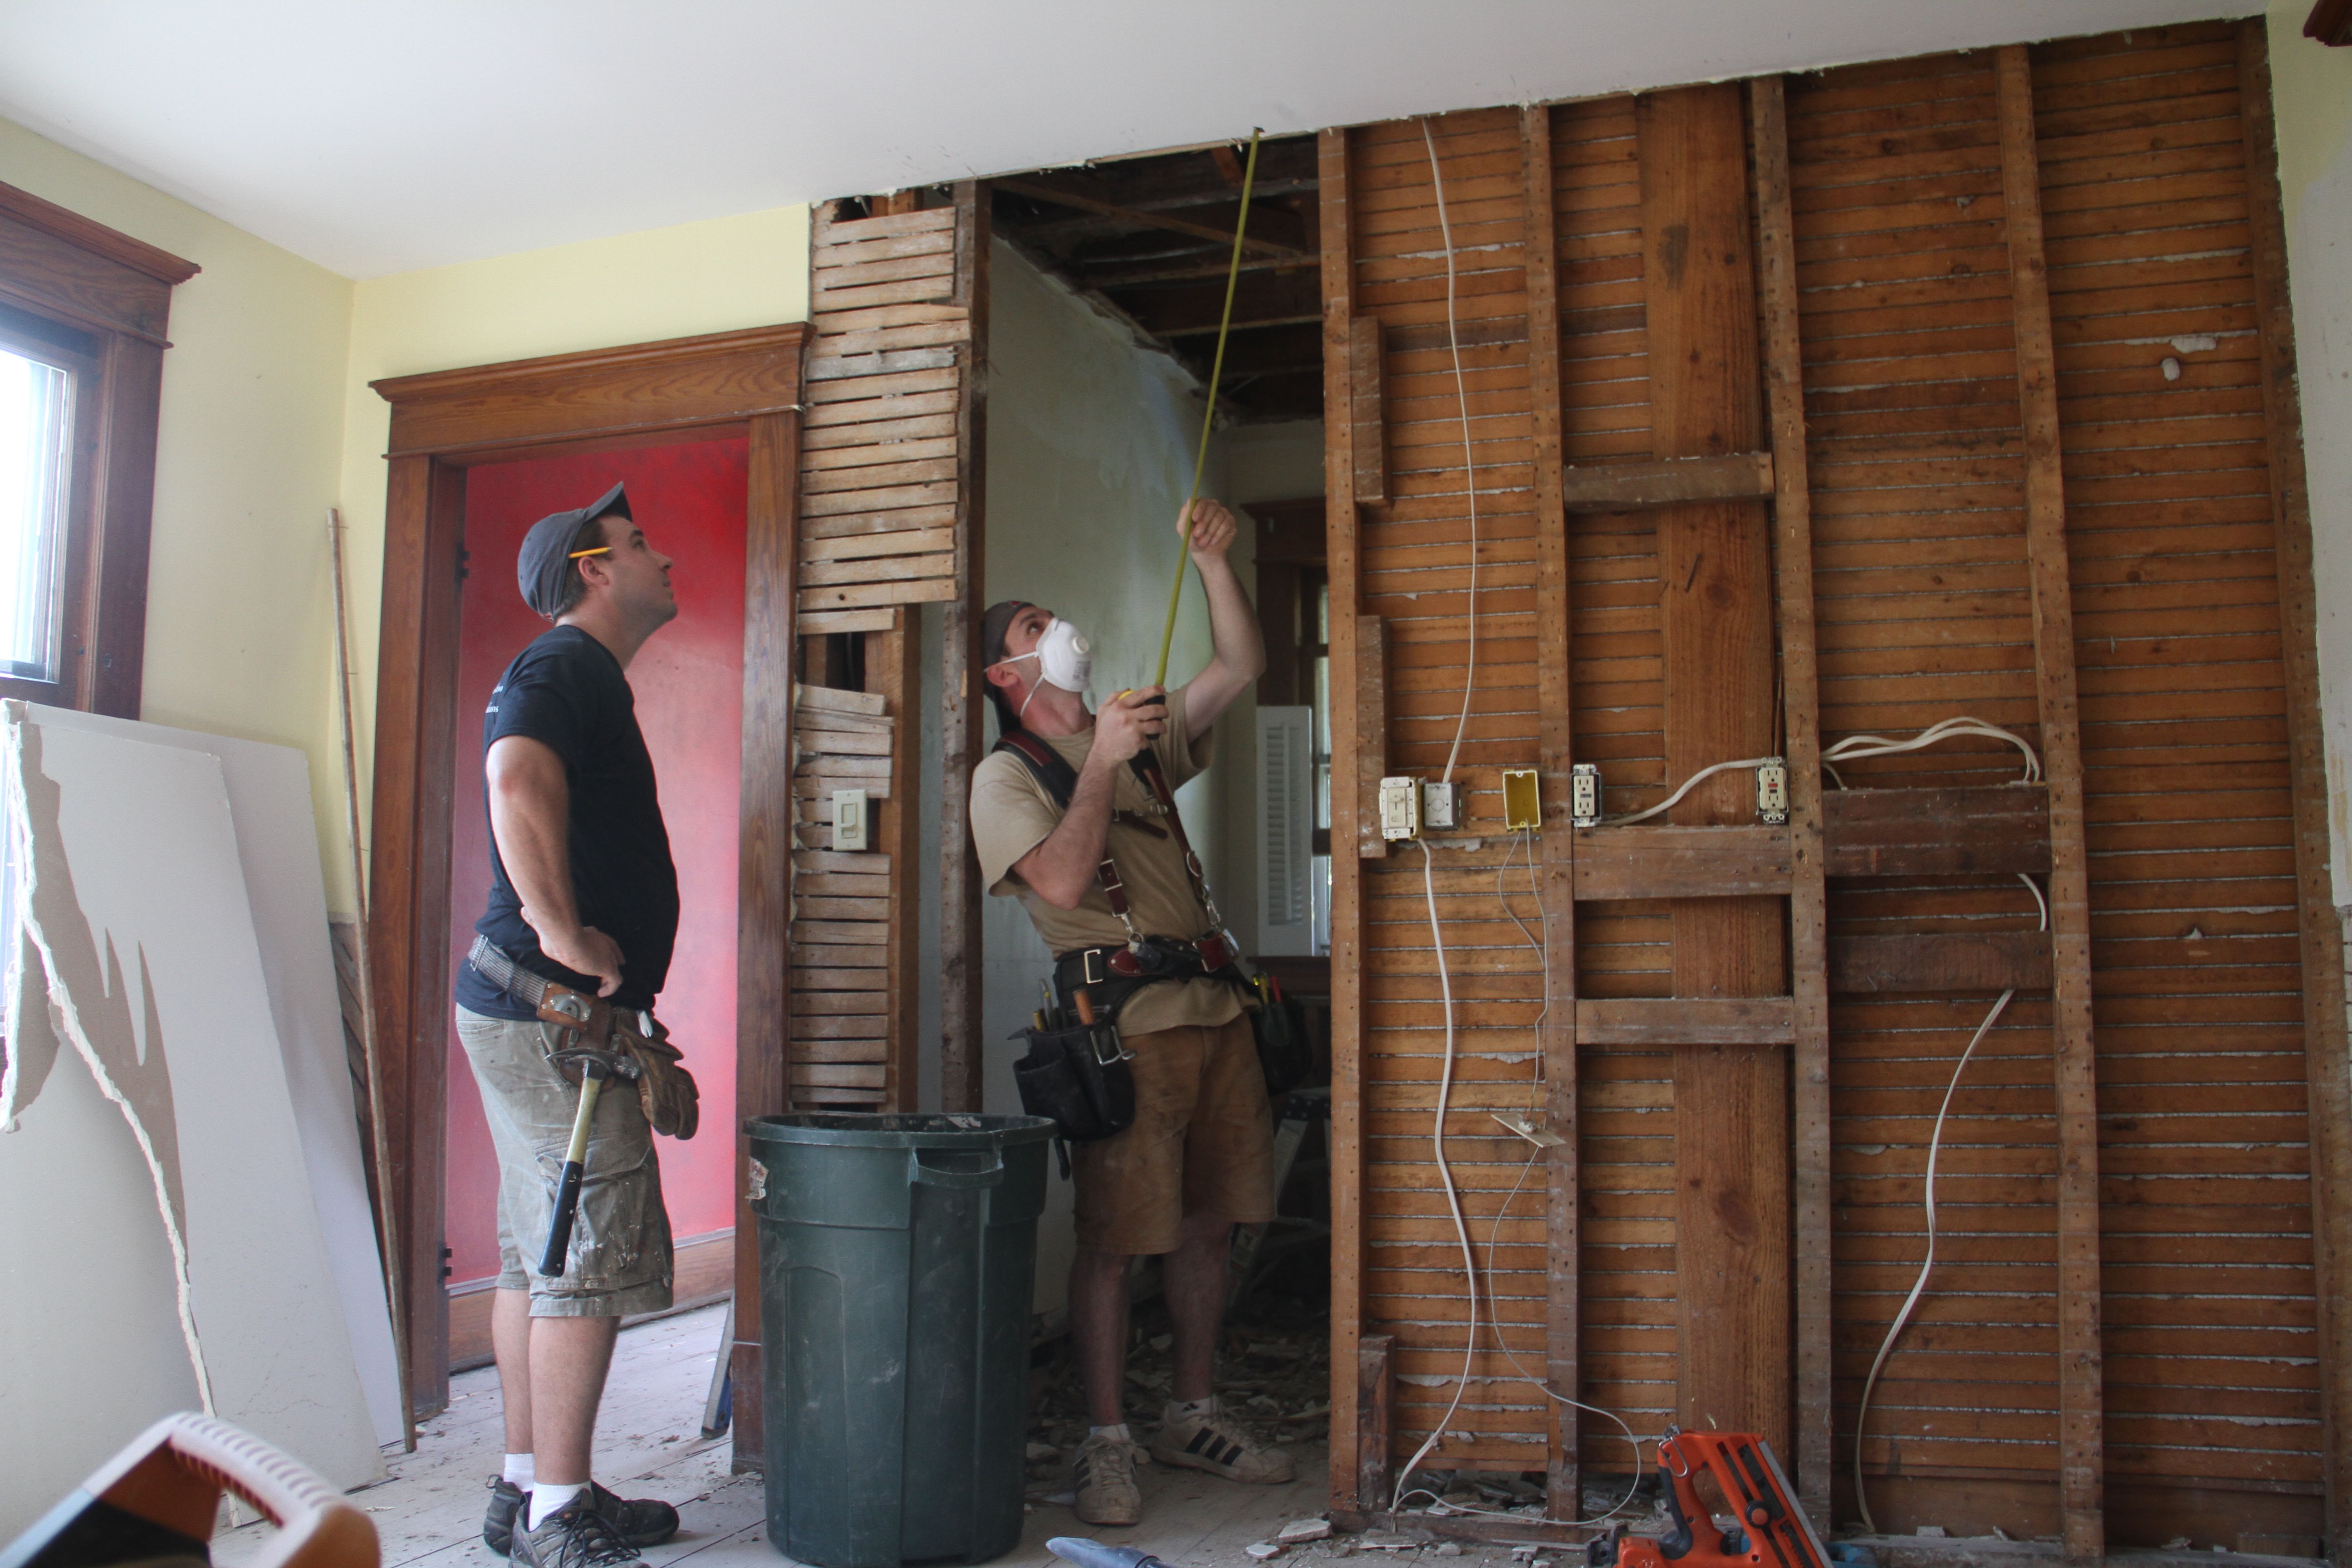 Dave and Jonas measuring the difference between ceiling heights in the adjacent spaces (formerly separated by a door).